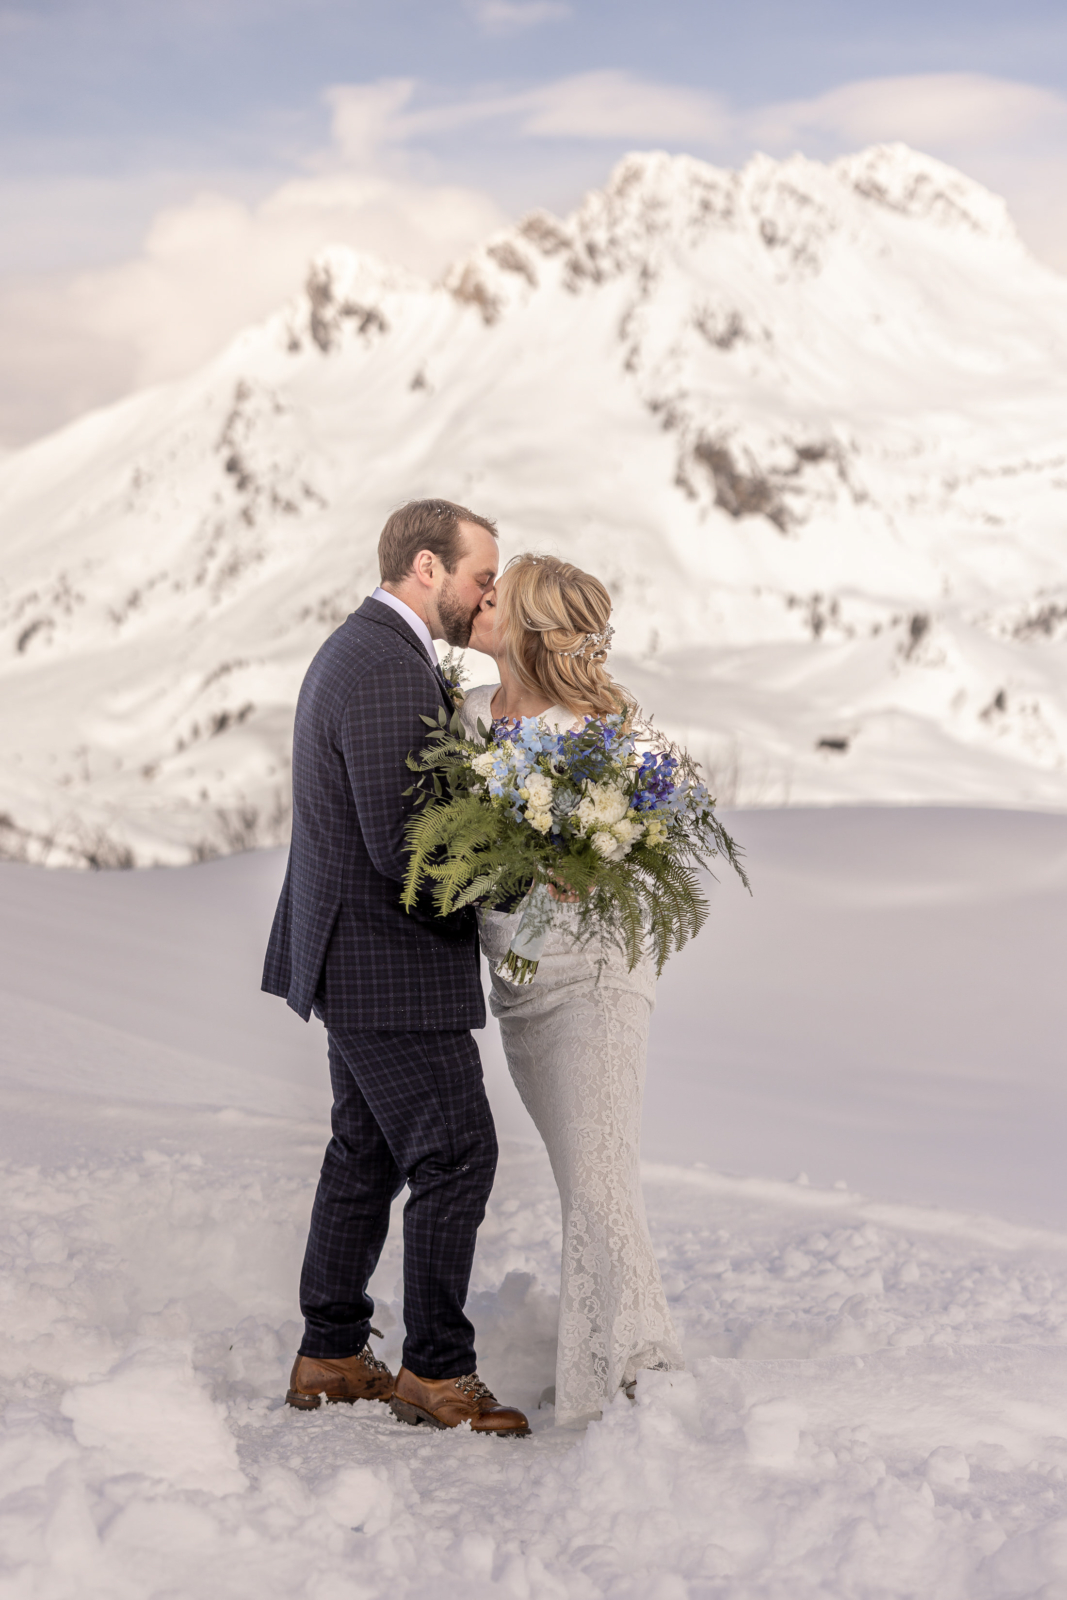 Wedding in the Austrian Alps in the snow